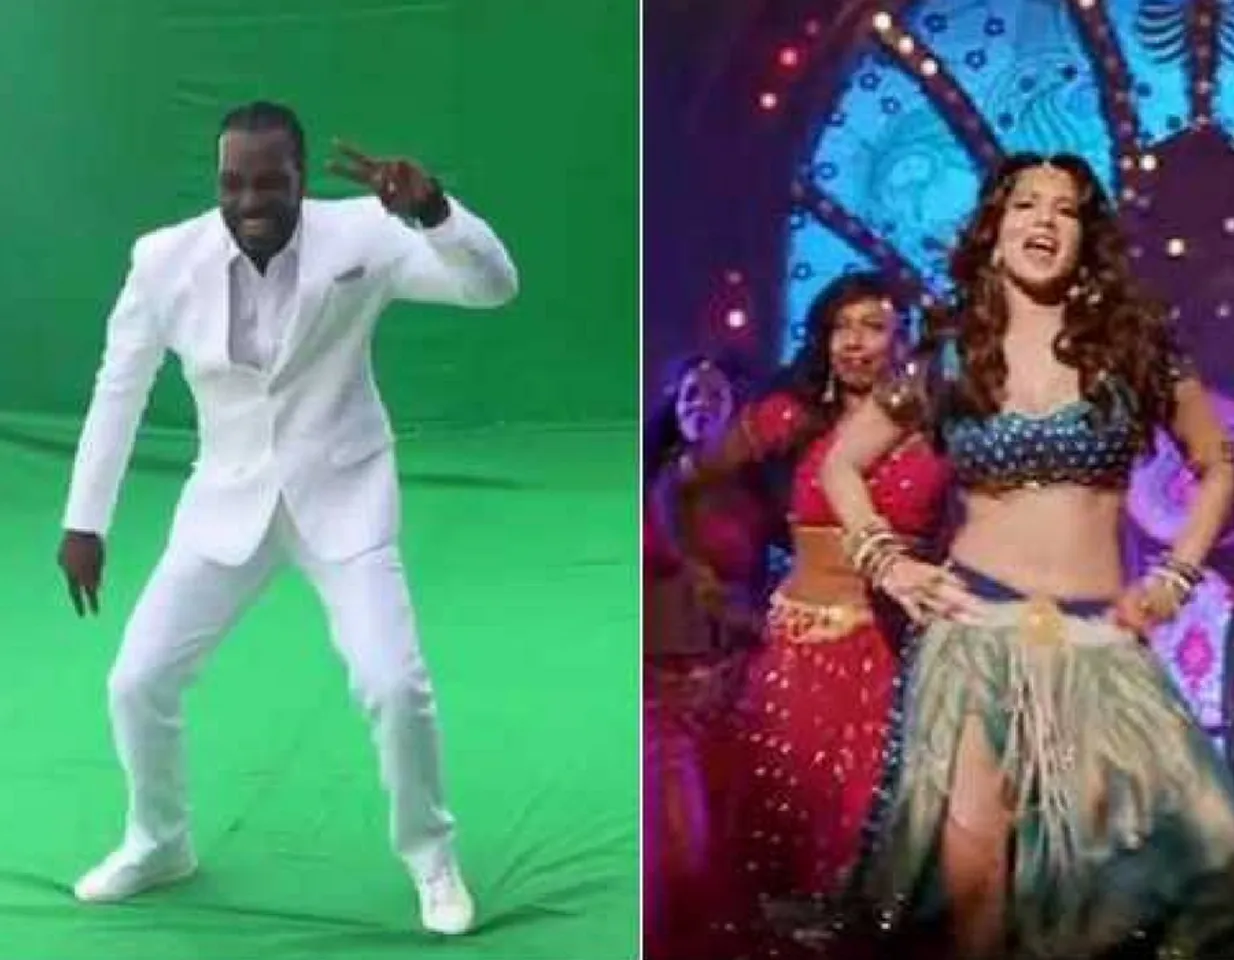 SUNNY LEONE NAILS CHRIS GAYLE'S DANCE CHALLENGE AND HOW